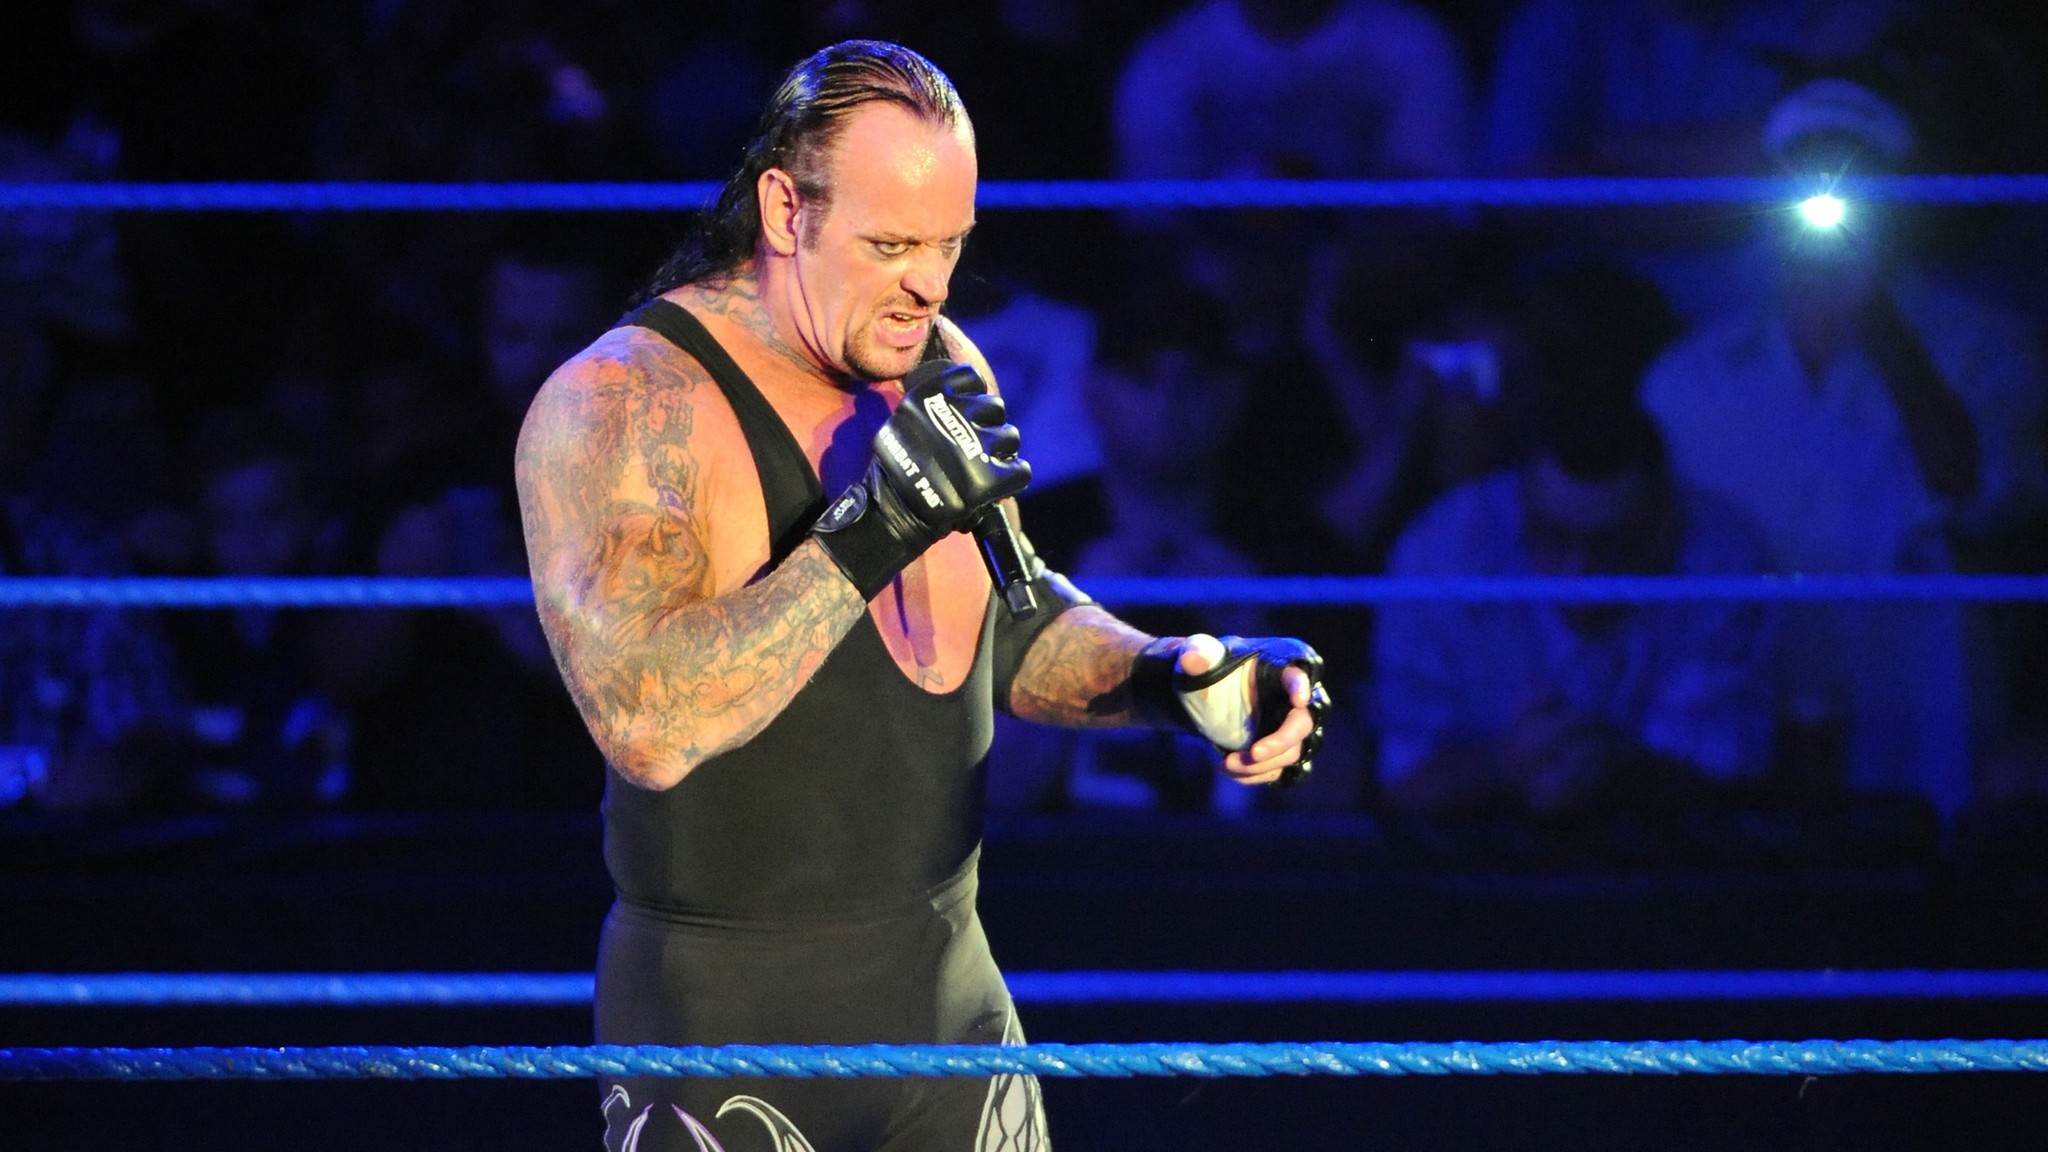 undertaker theme song download